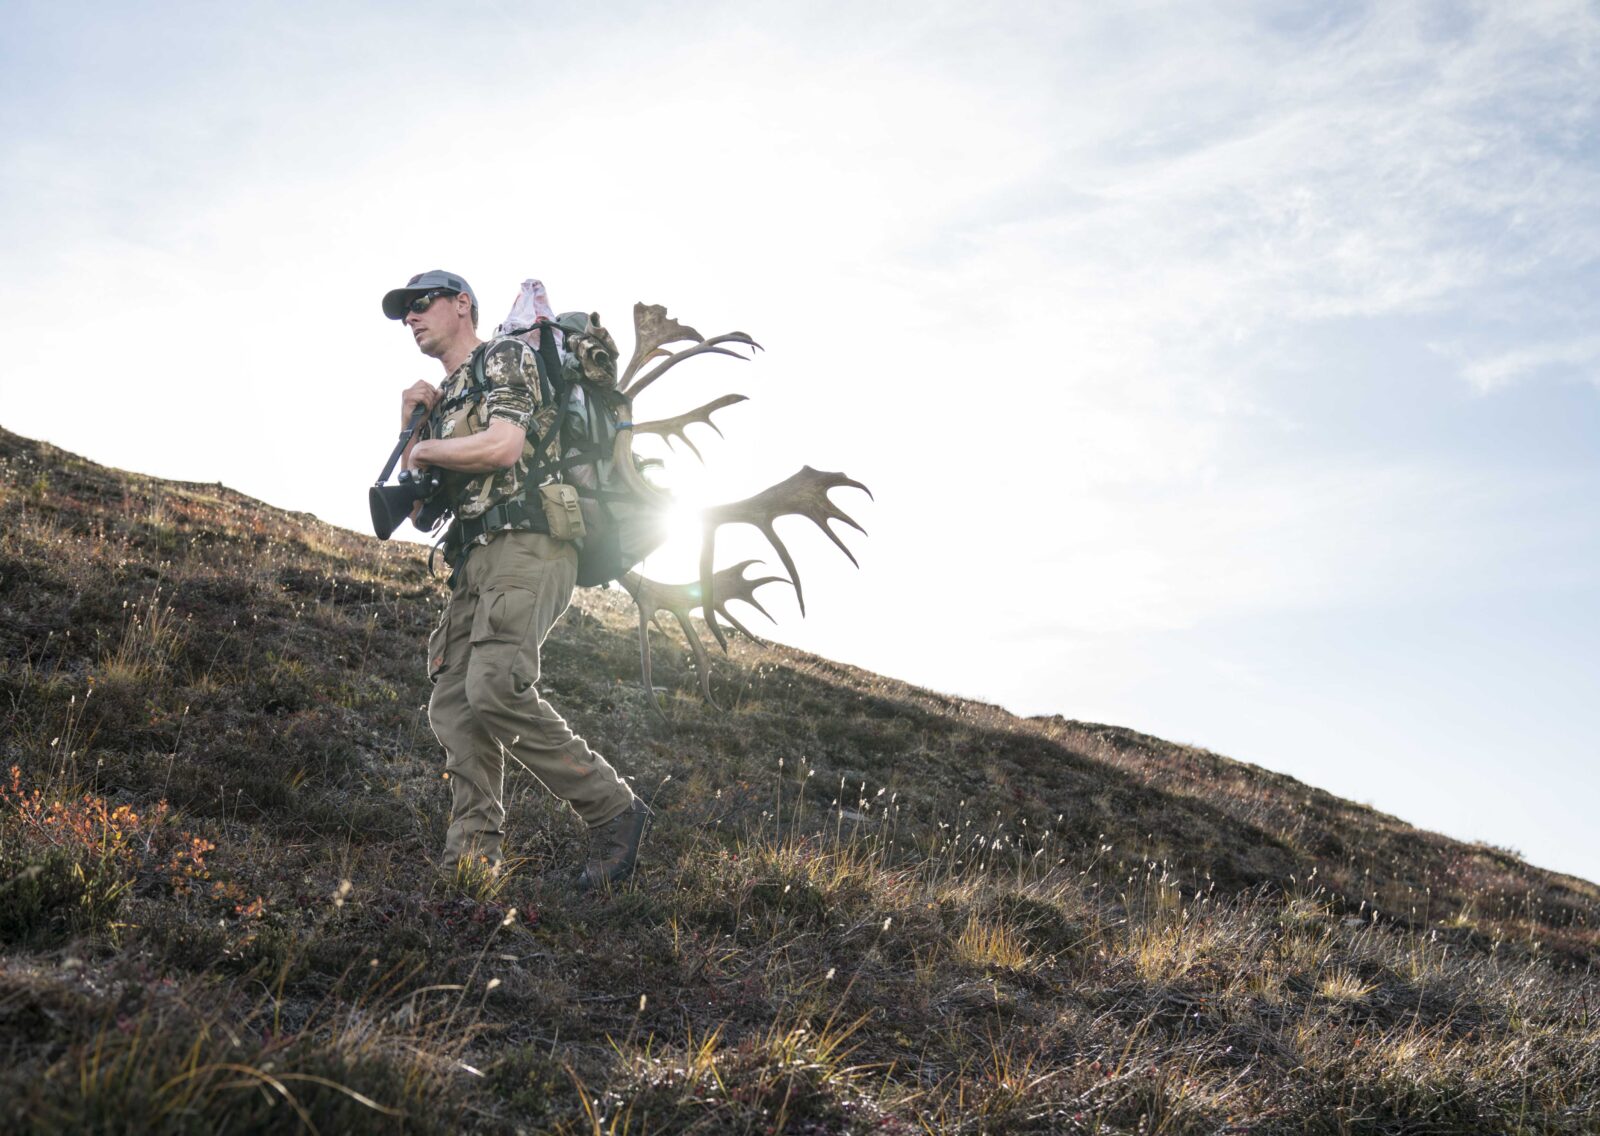 A hunter walking ver a ridge with antlers on his back